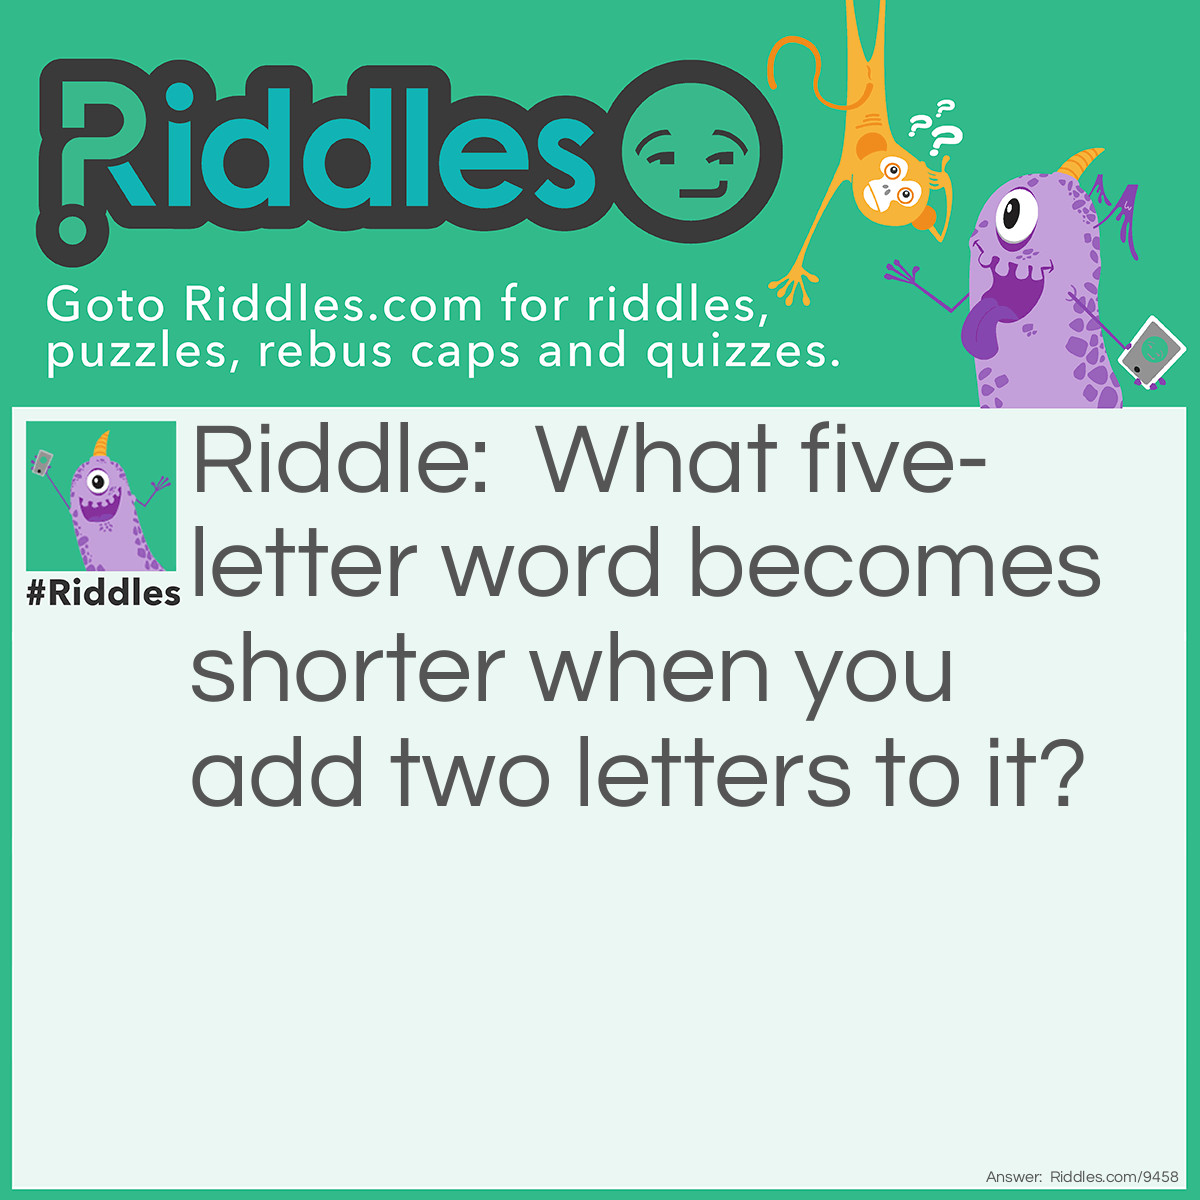 Riddle: What five-letter word becomes shorter when you add two letters to it? Answer: Short.